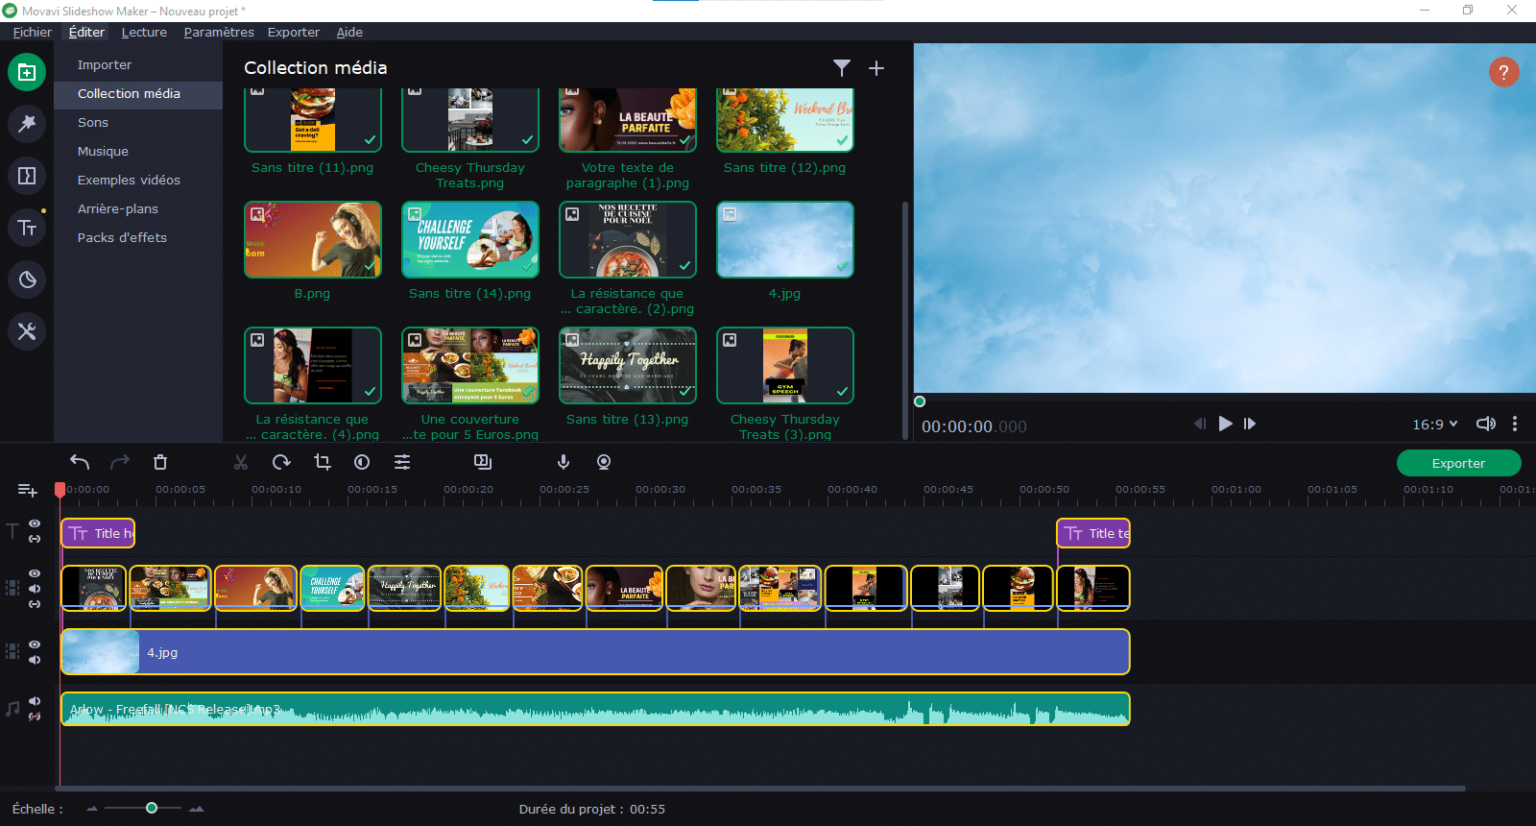 how to renew movavi video editor for free